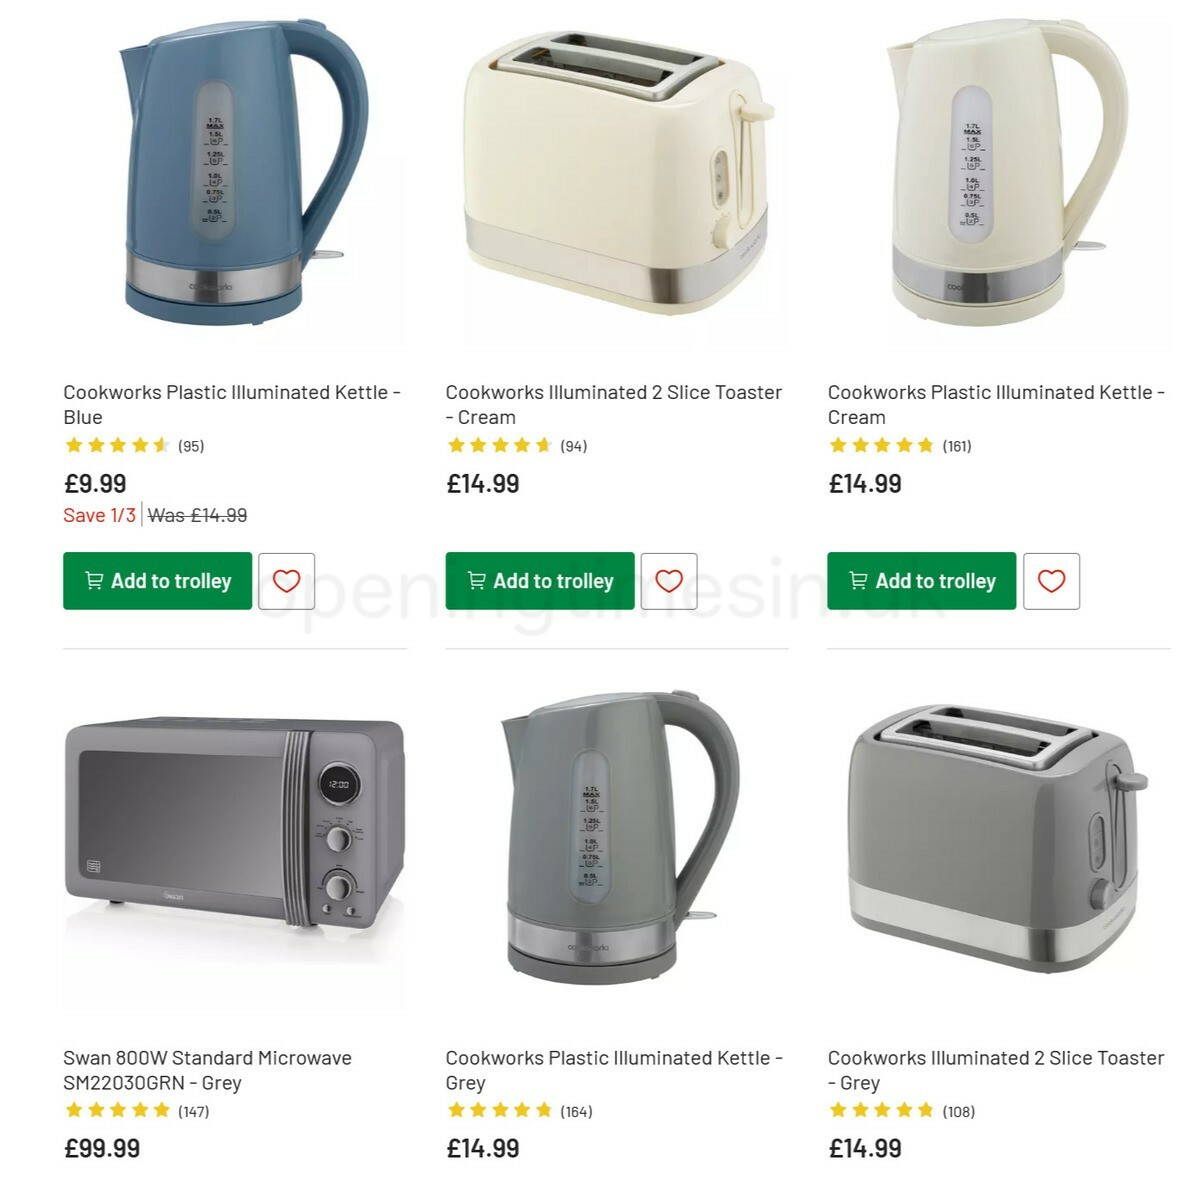 Argos Offers from 20 April